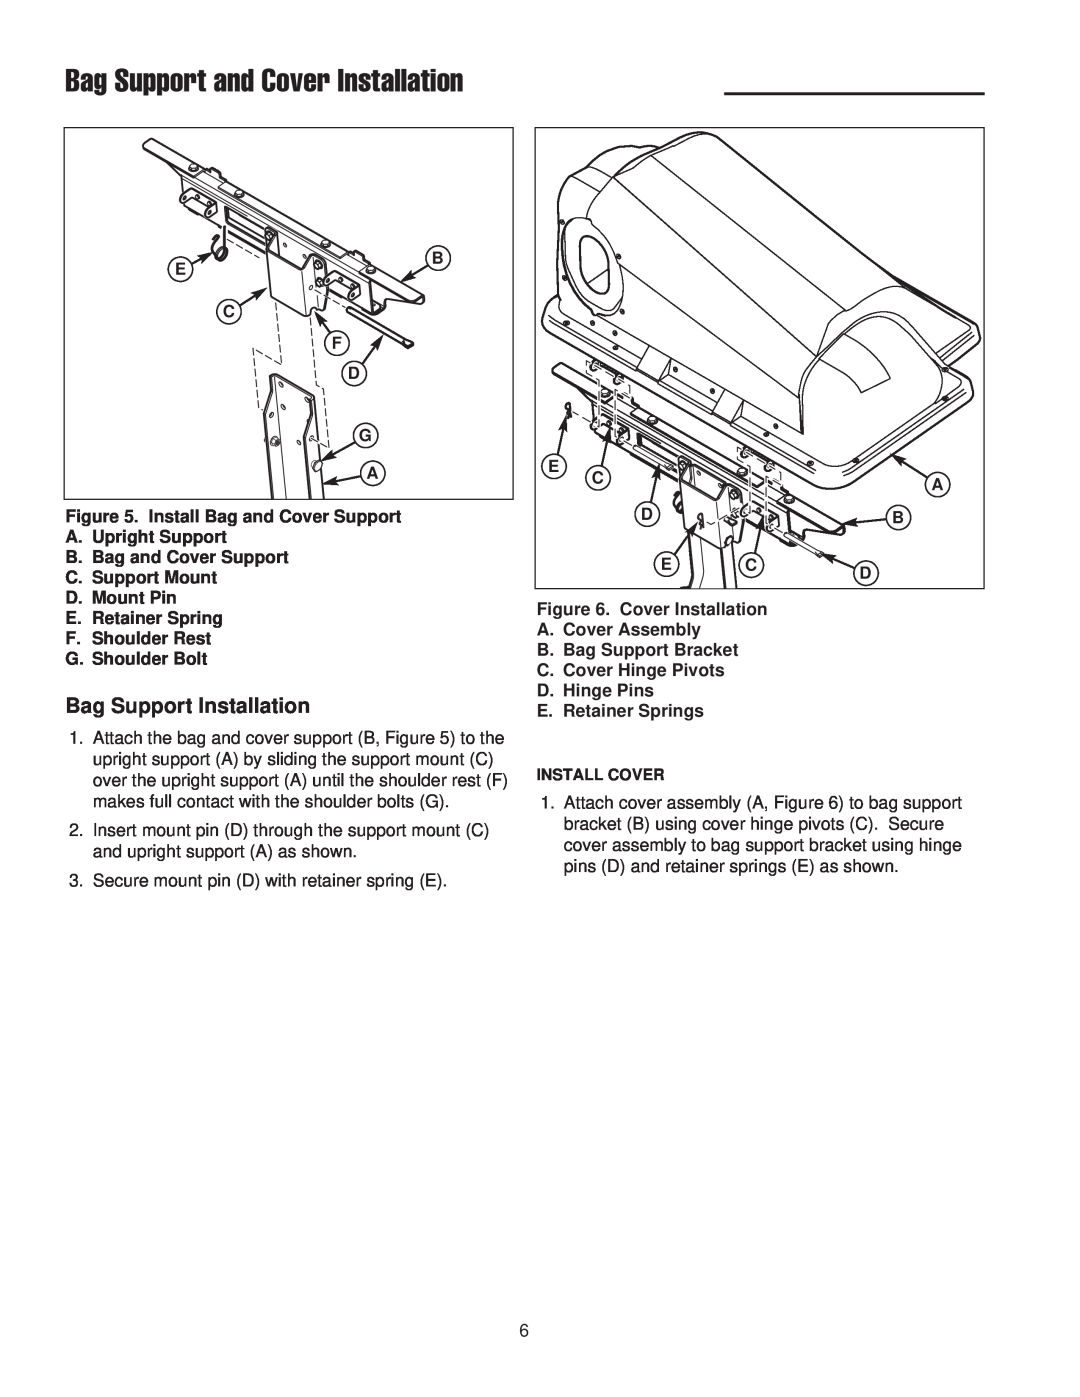 Briggs & Stratton 1695284 manual Bag Support and Cover Installation, Bag Support Installation 